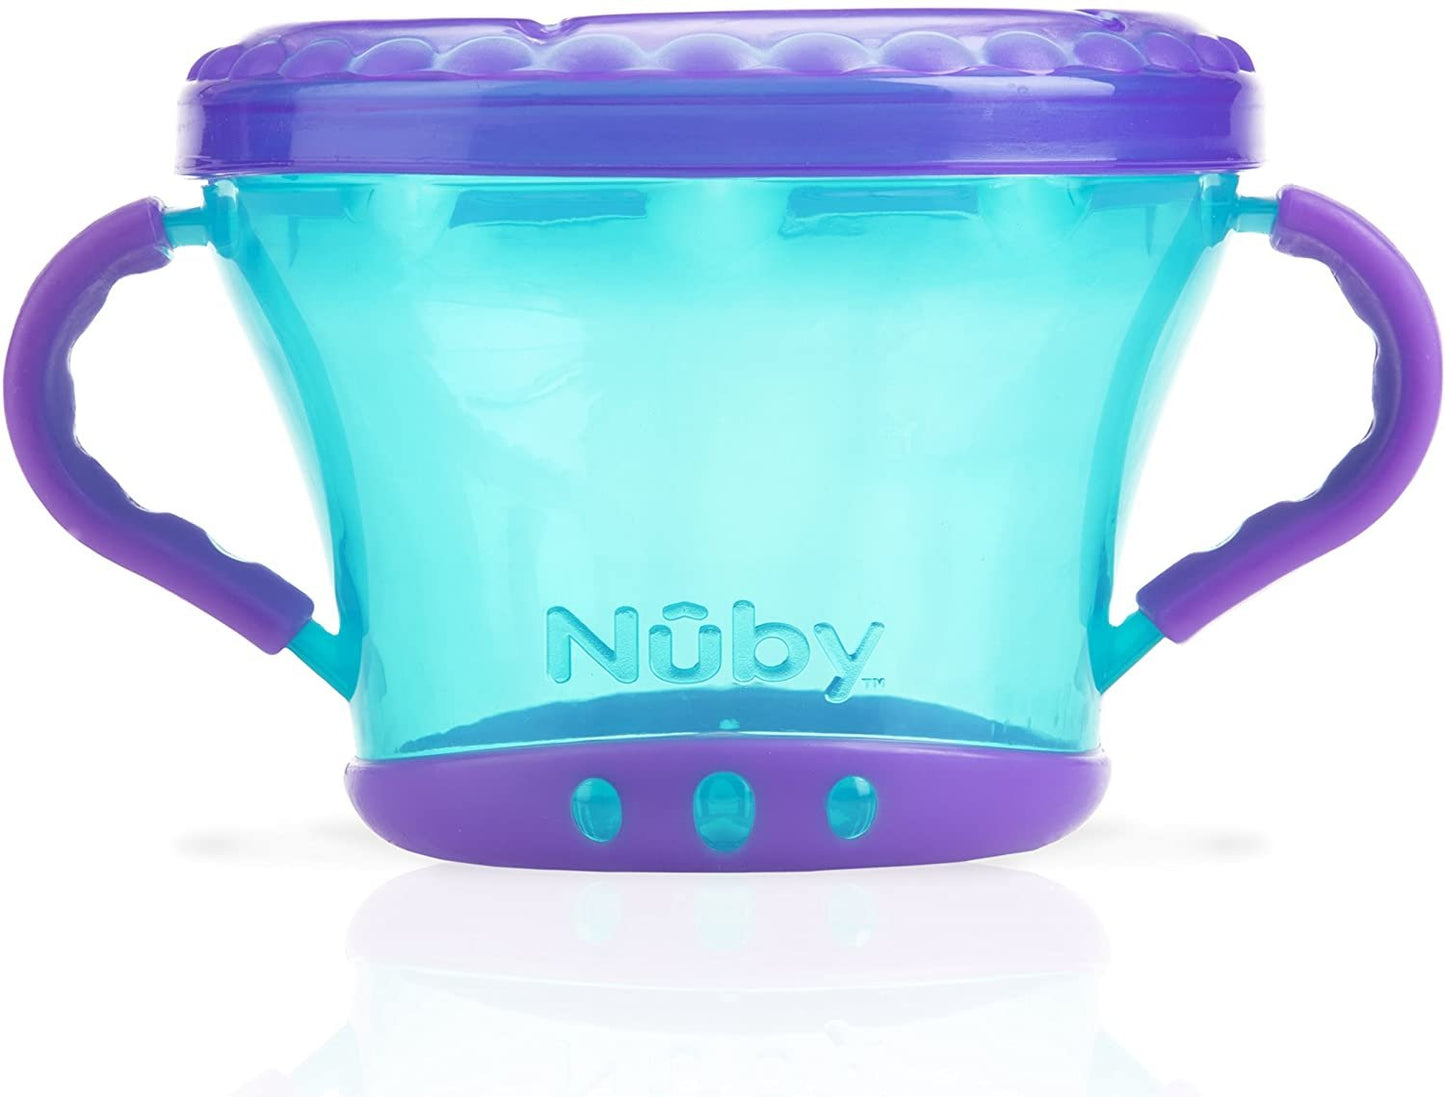 Nuby Snack Keeper, Colors May Vary, 5"